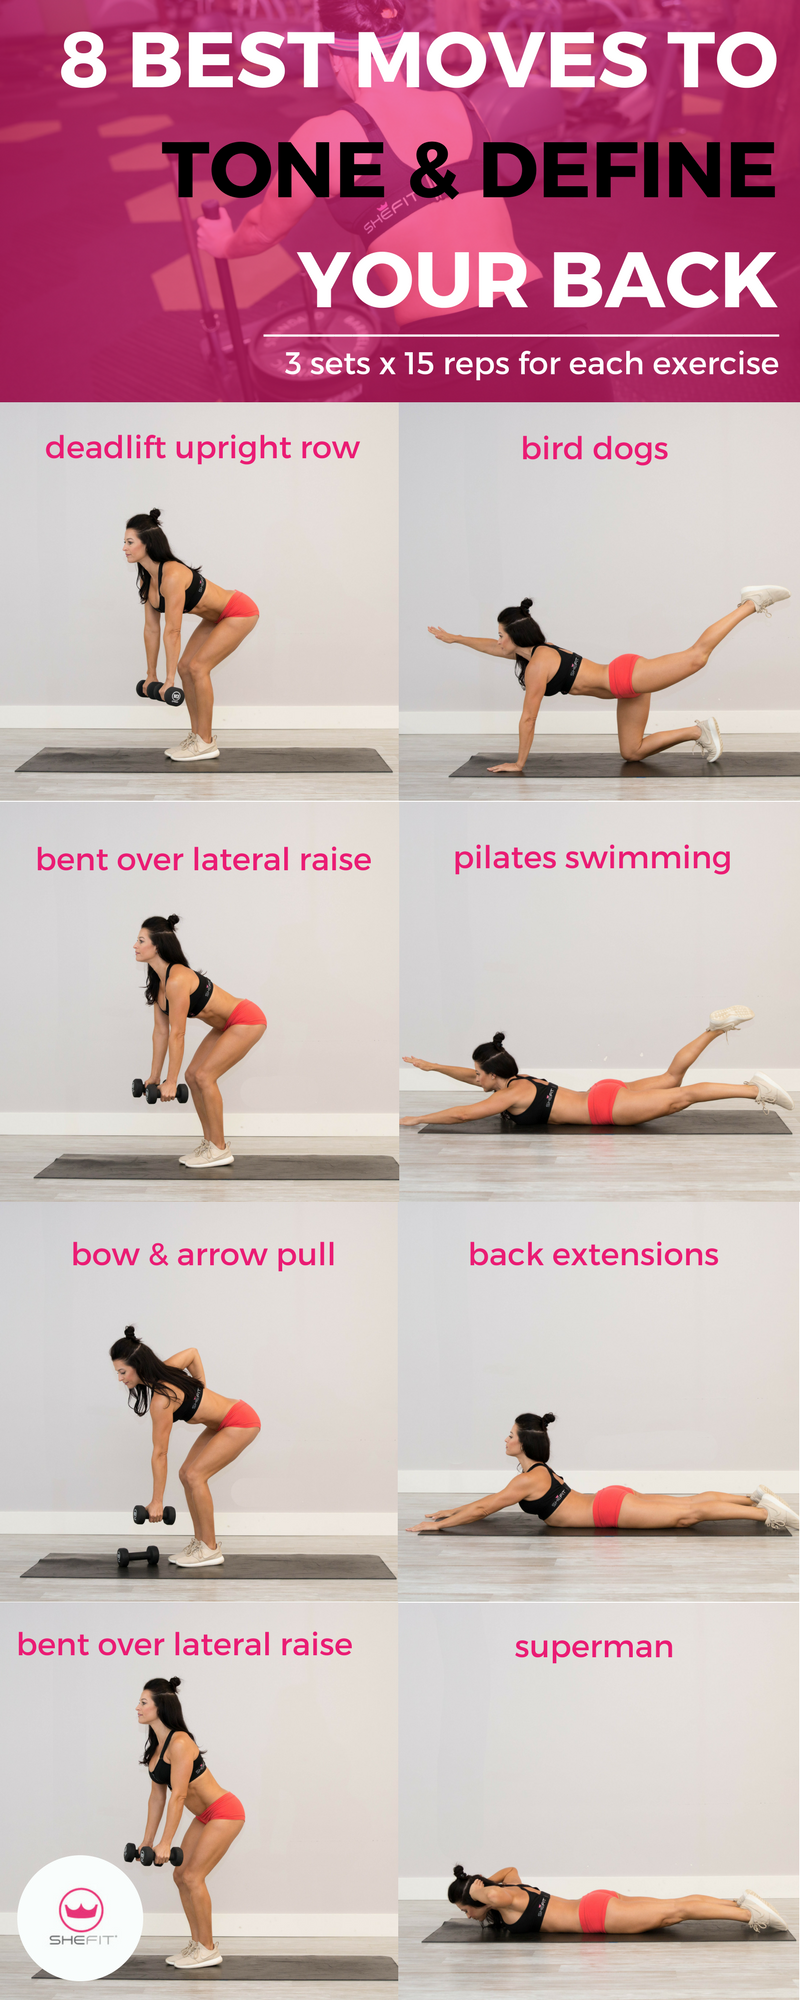 Lose Your Back Fat: 8 Best Workout Exercises for Women | The 8 back exercises below are designed to target your upper and lower back muscles, helping you get that toned look you’re after. With summer already on its way, you’ll be ready for those tank tops and dresses in no time! 